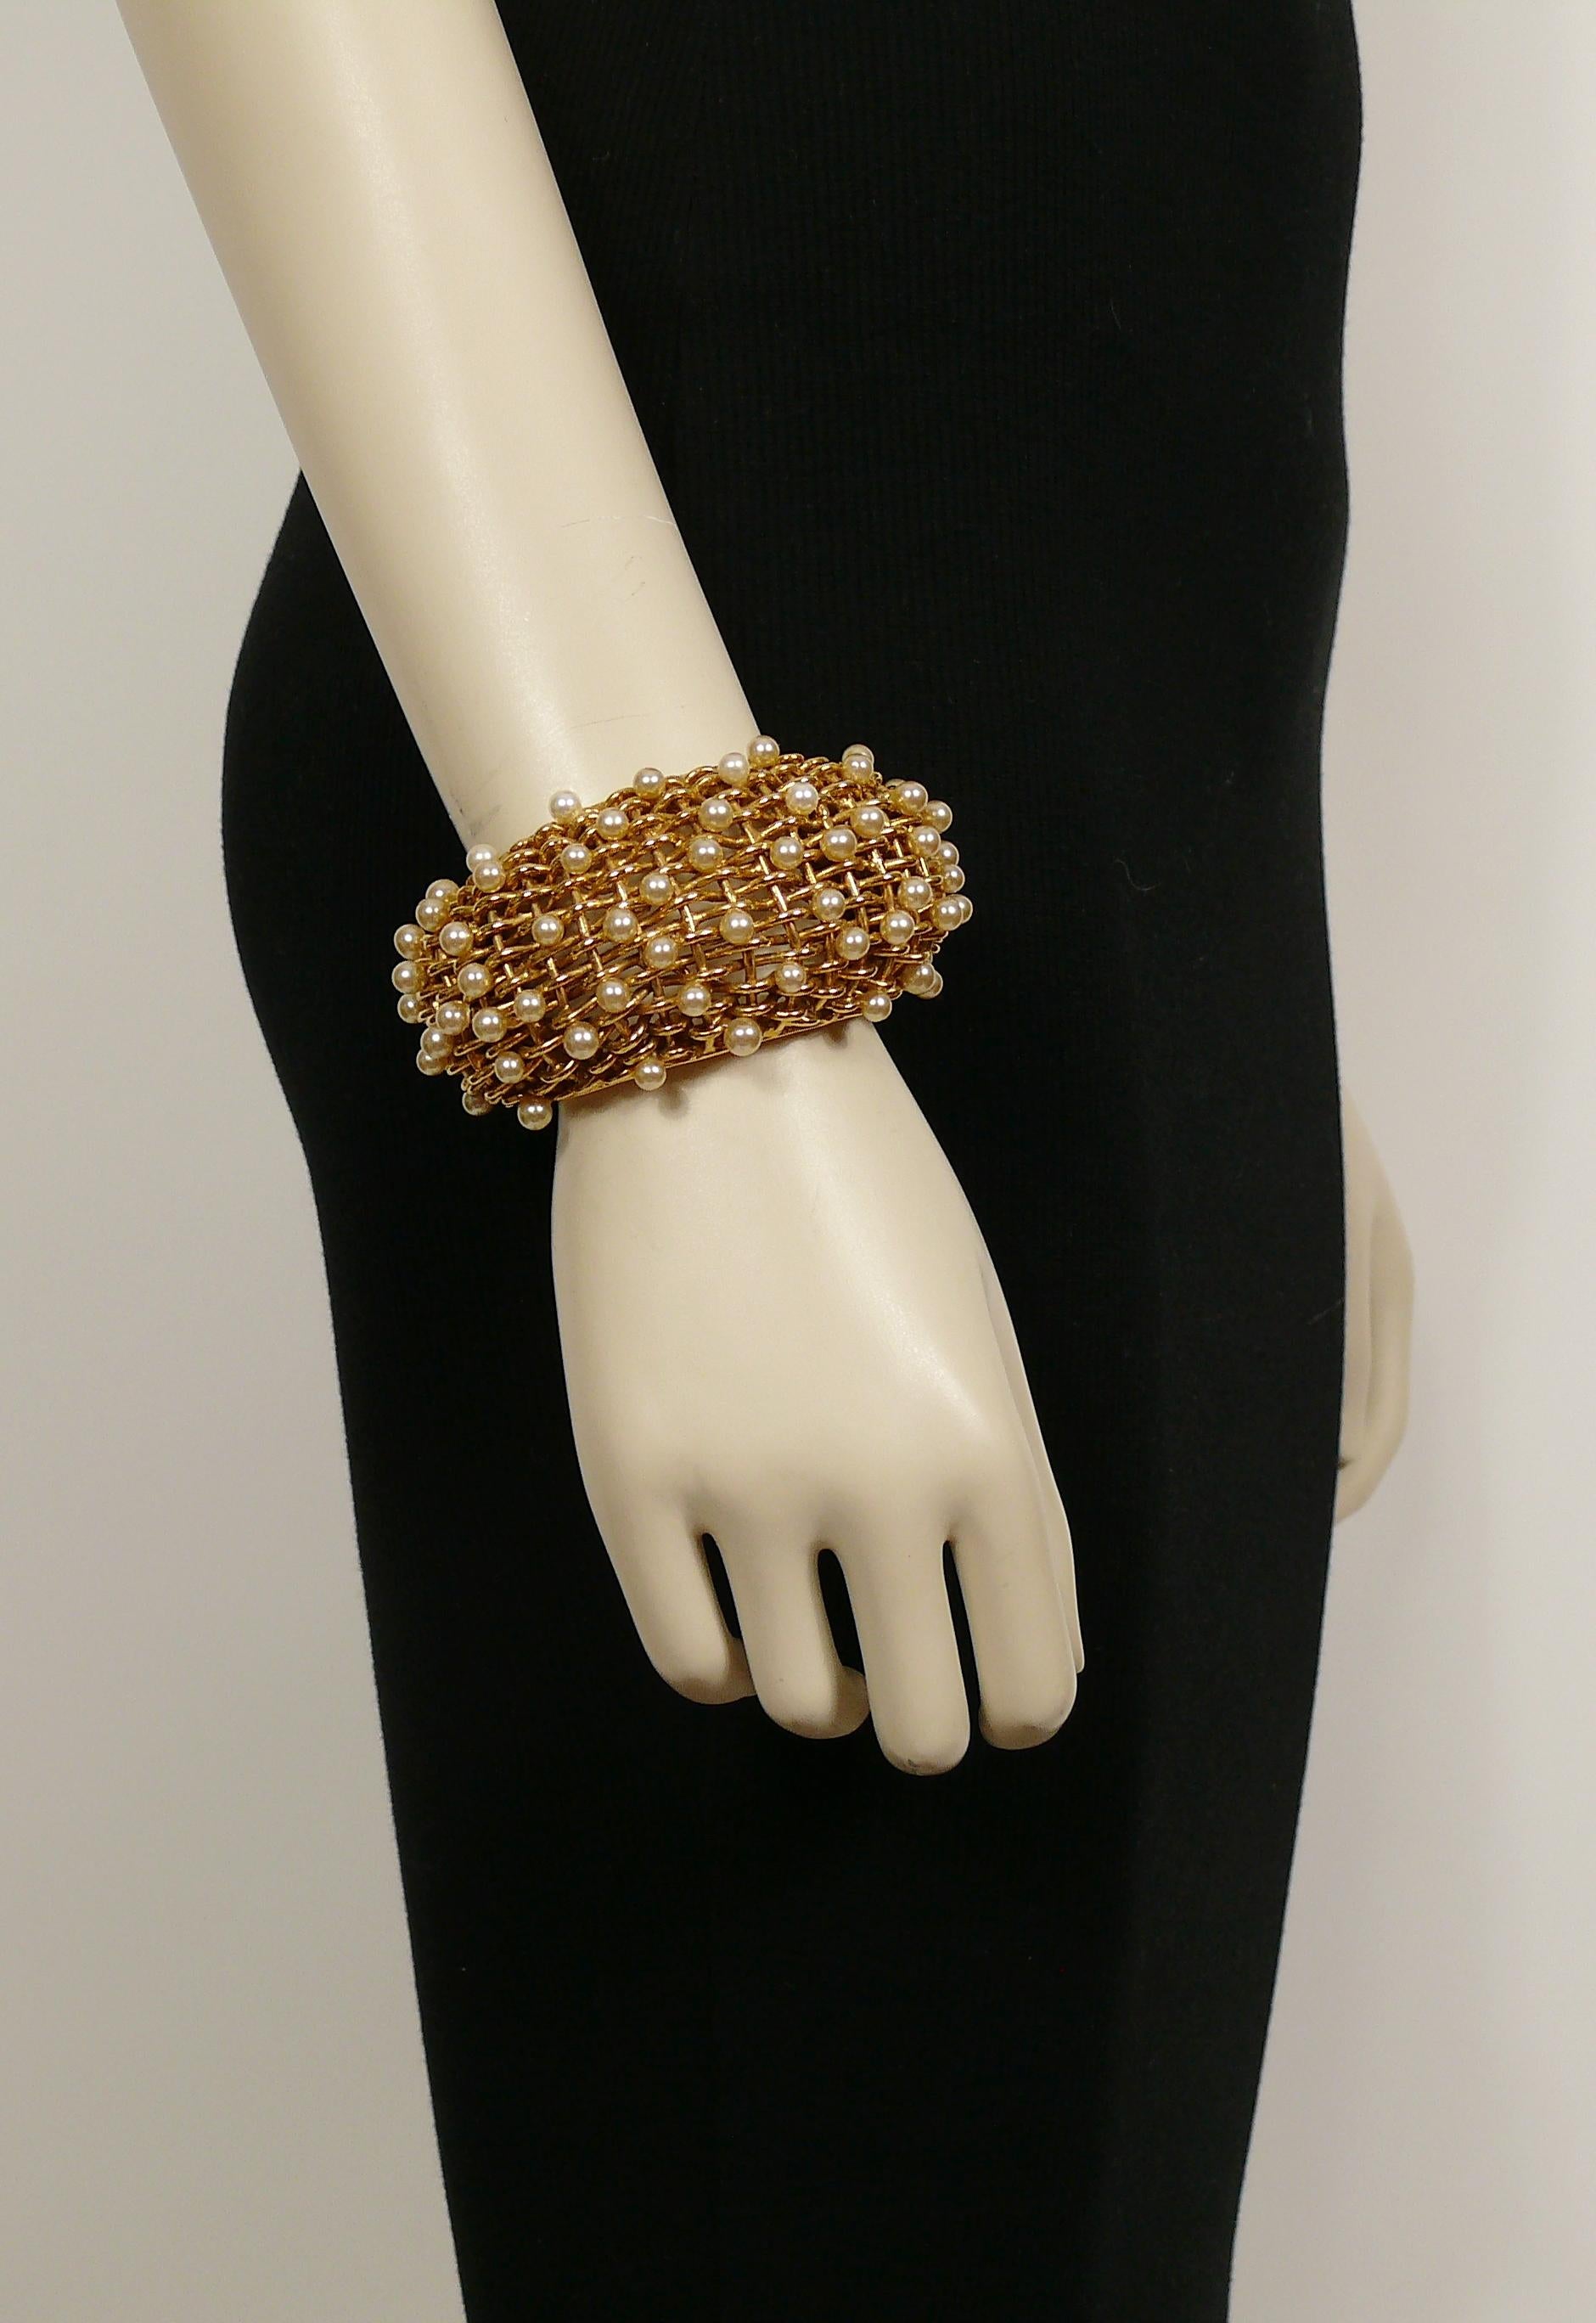 CHANEL vintage gold tone braided design wide cuff bracelet embellished with faux pearls of various sizes.

Collection year n°23 (1988).

Embossed CHANEL 2 3 Made in France.

Indicative measurements : inner measurements approx. 5.2 cm x 4.5 cm (2.05